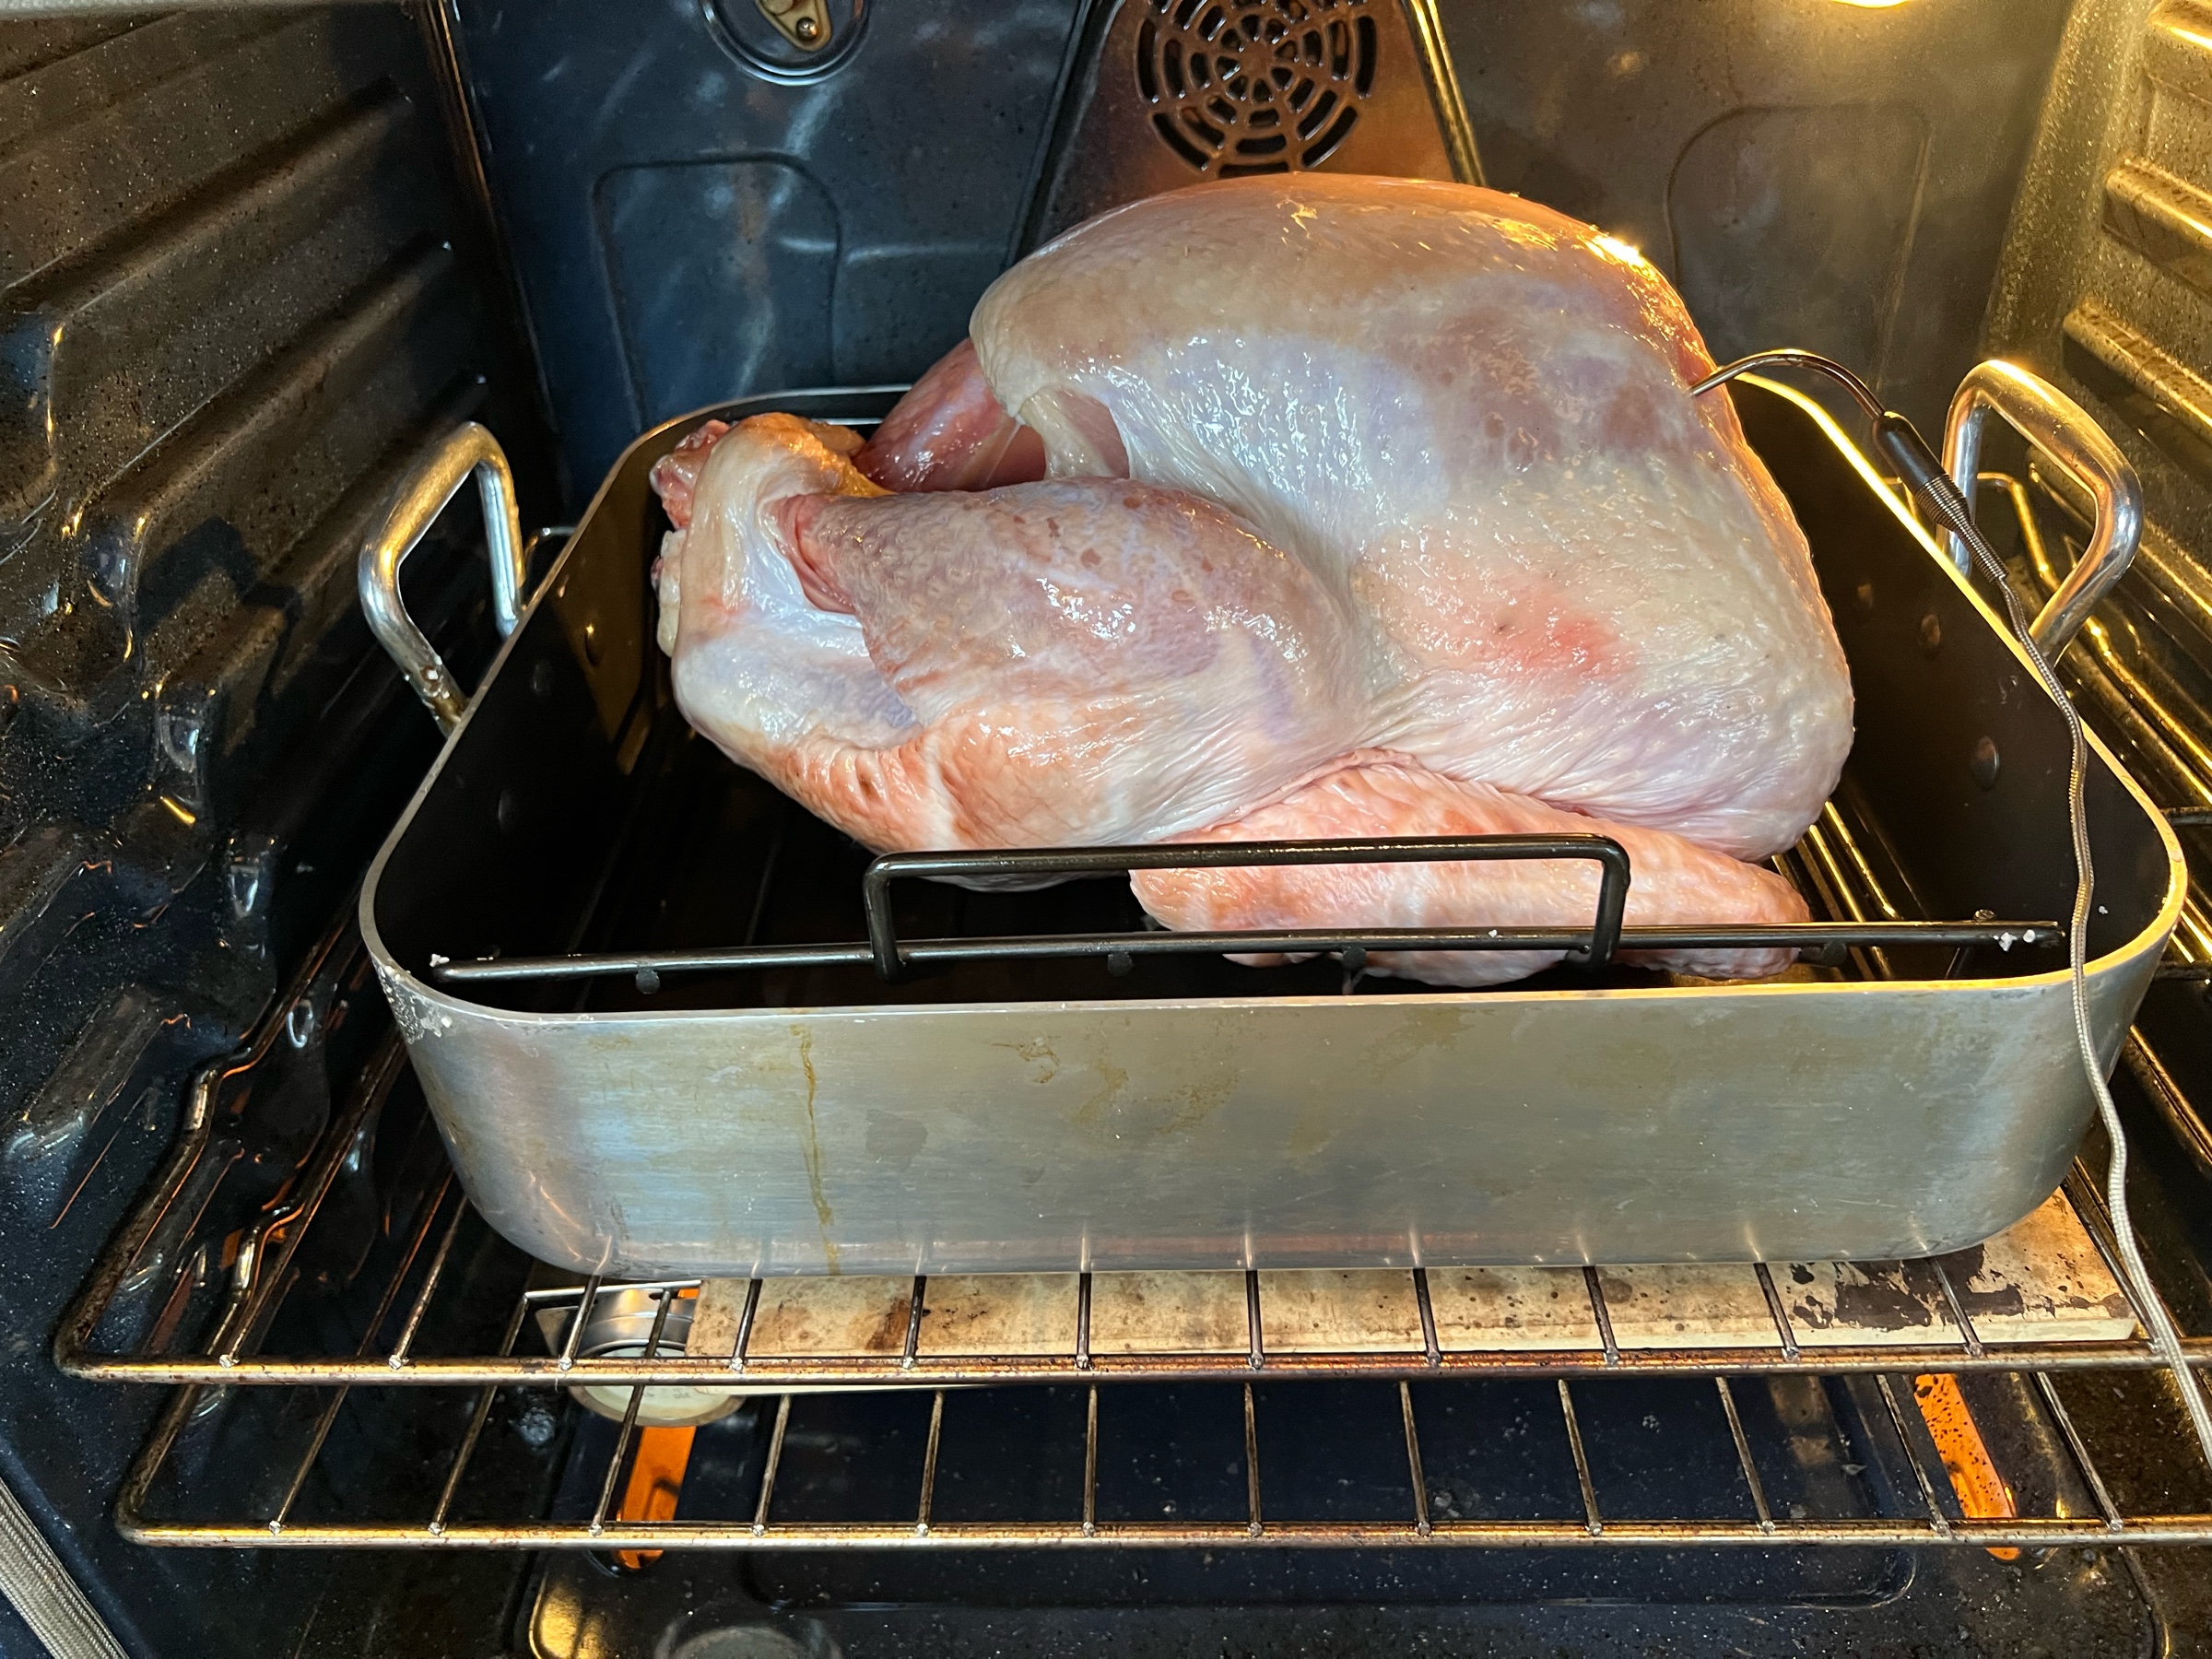 A turkey in a roasting pan, just placed in the oven